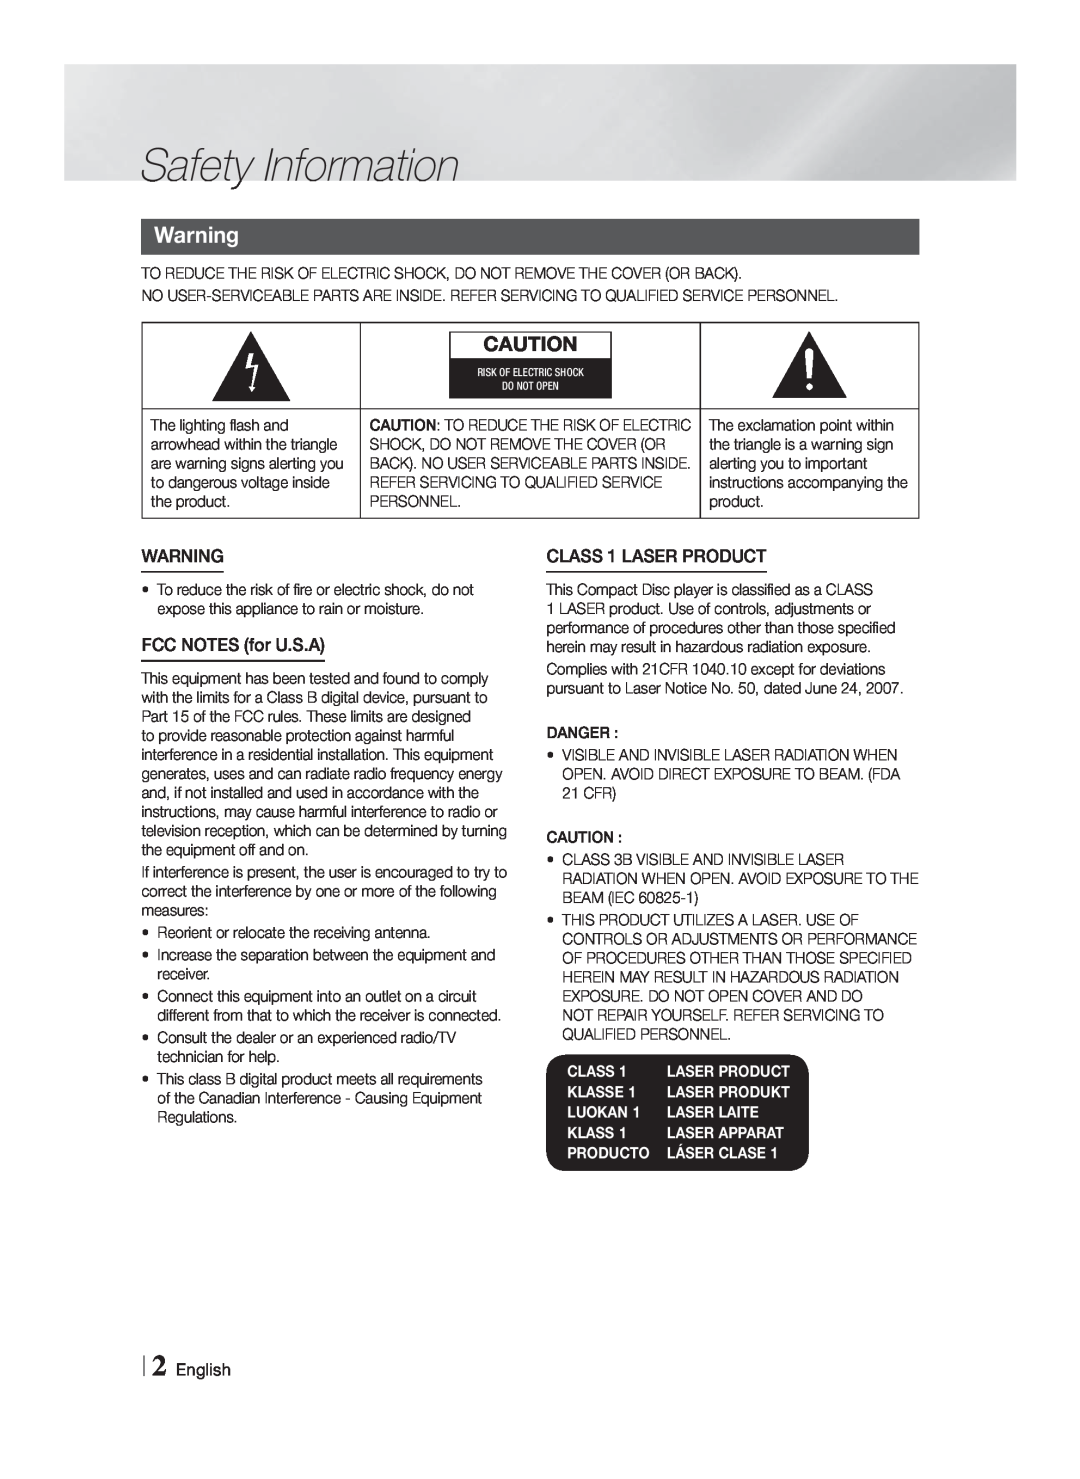 Samsung HT-F5500W Safety Information, FCC NOTES for U.S.A, CLASS 1 LASER PRODUCT, English, Class, Klasse, Luokan, Producto 